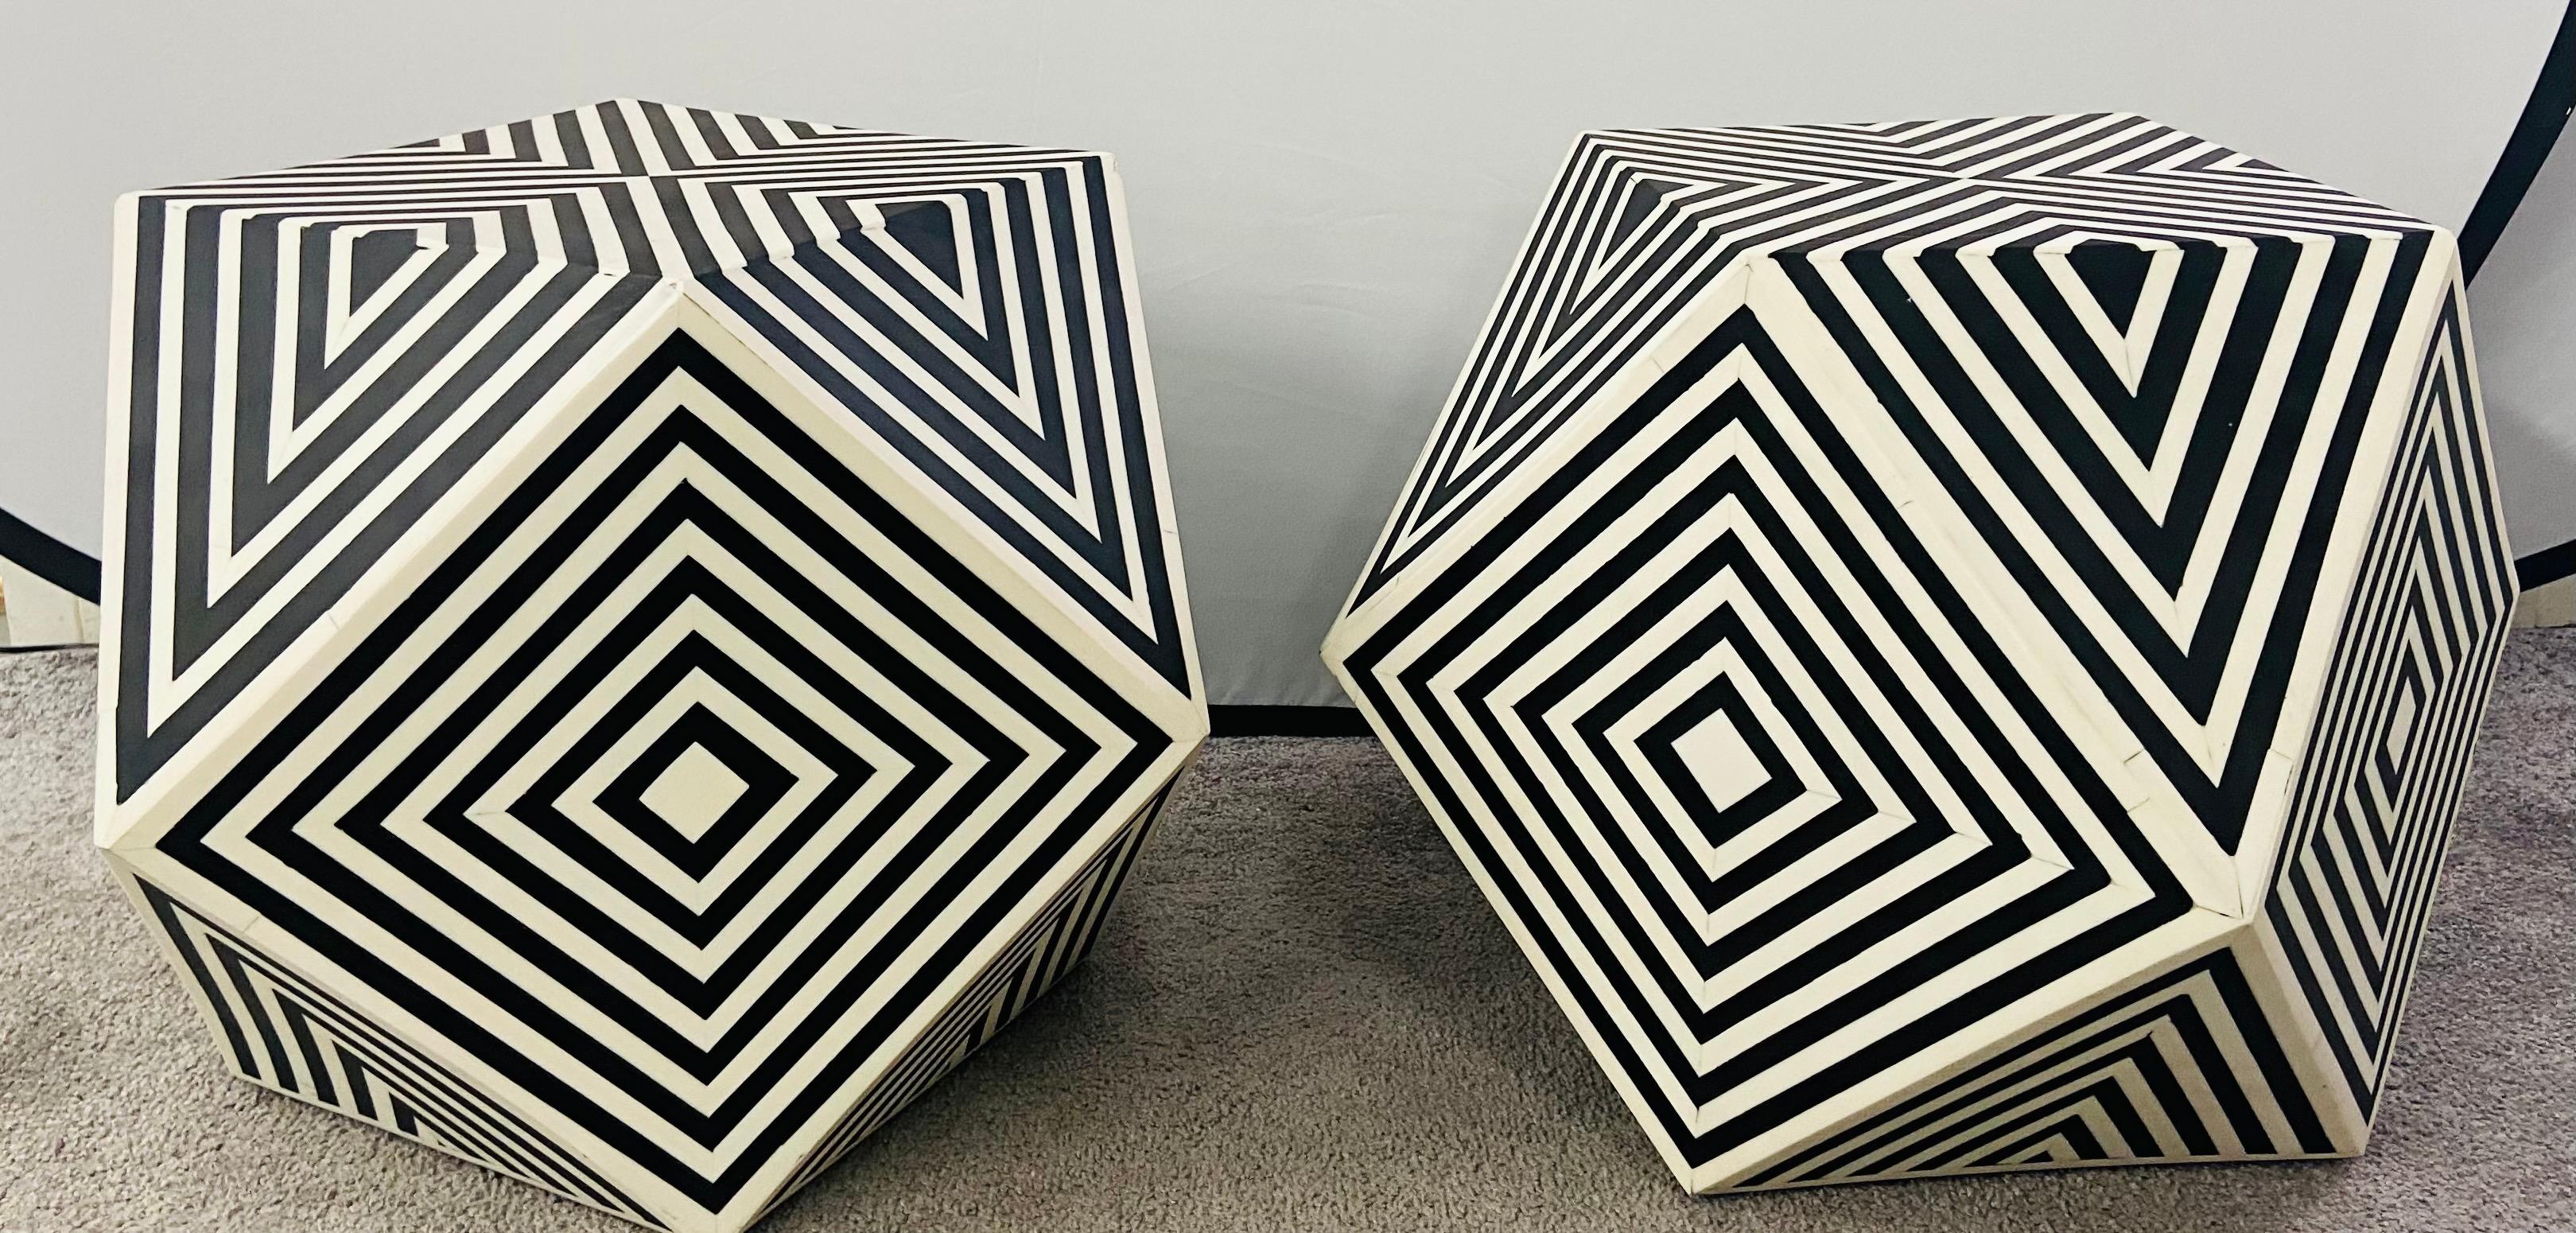 The one of a kind pair of Art Deco style sculptural side, end tables or stools features a geometrical bulky design .The sculptural solidly made table or stool is hand crafted of resin in a black and white stripes' pattern. Very stylish, the pair of